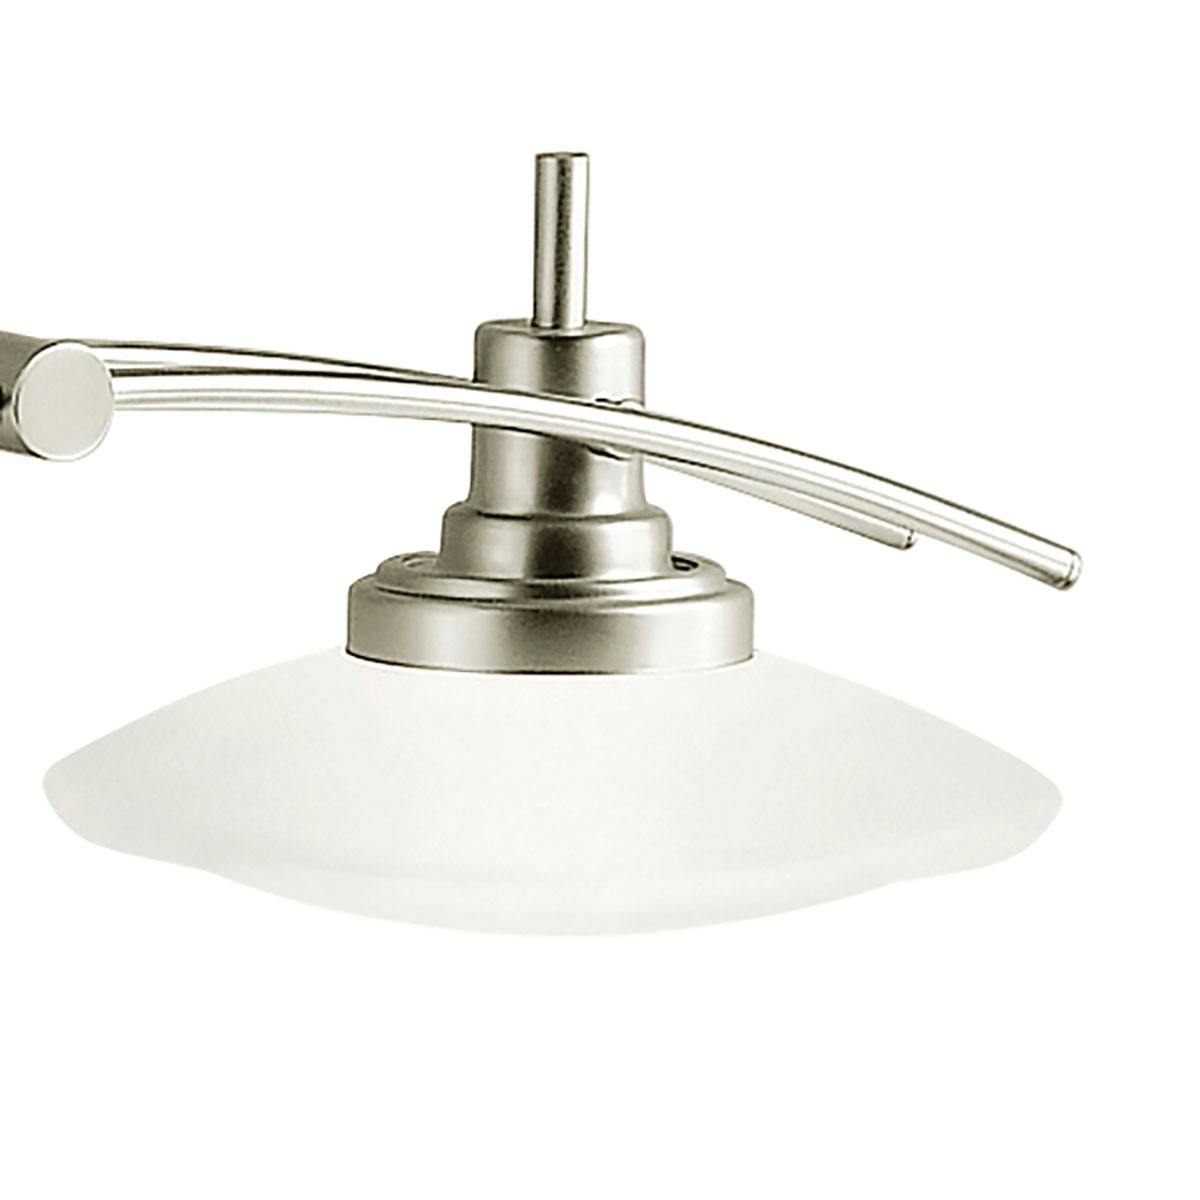 Close up view of the Structures 2 Light Vanity Light Nickel on a white background